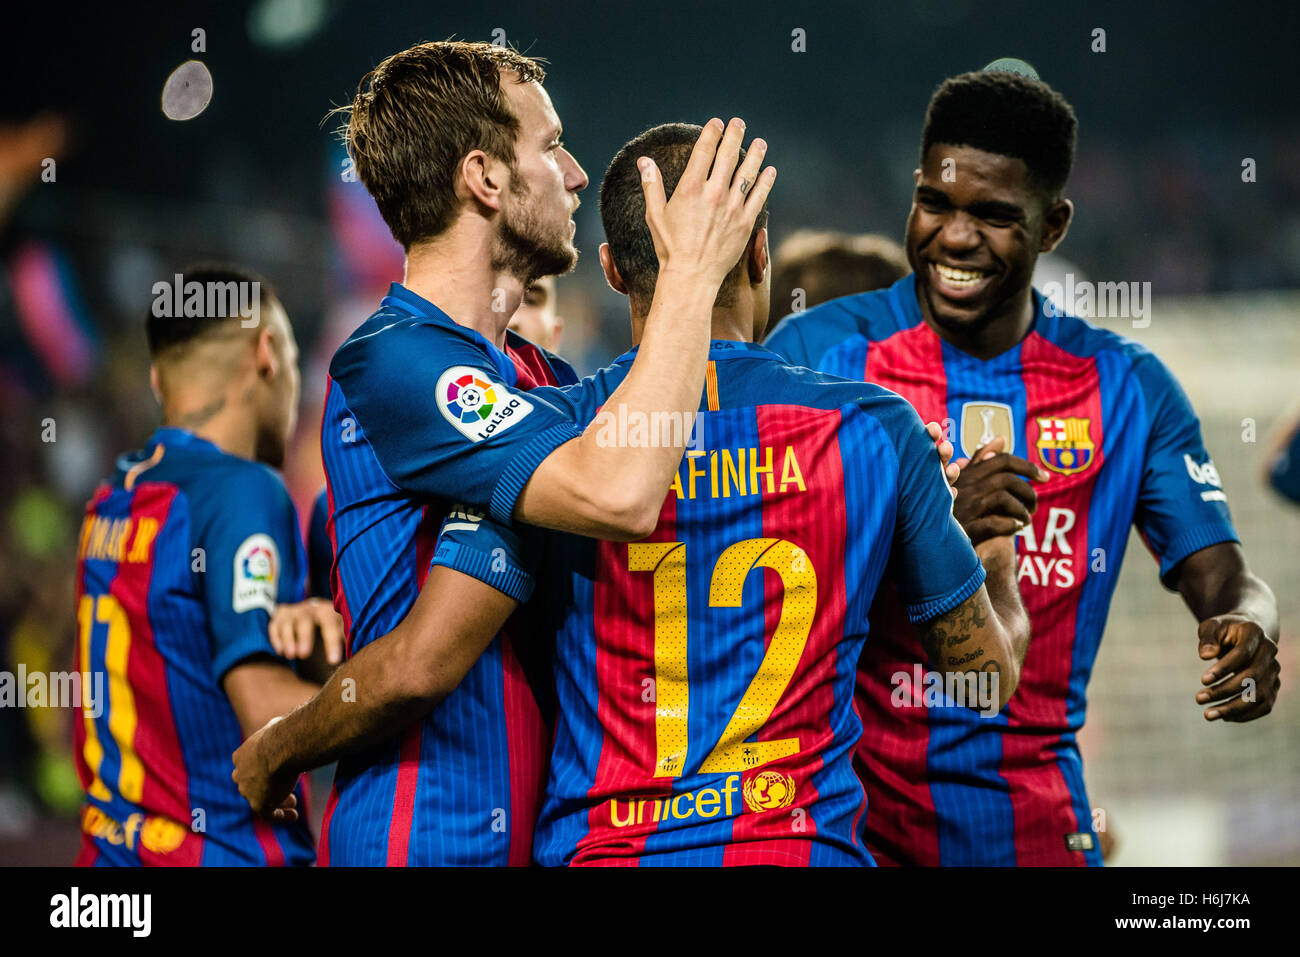 Barcelona, Catalonia, Spain. 29th Oct, 2016. FC Barcelona midfielder RAFINHA celebrates his goal with teammates during the LaLiga match between FC Barcelona and Granada CF at the Camp Nou stadium in Barcelona © Matthias Oesterle/ZUMA Wire/Alamy Live News Stock Photo